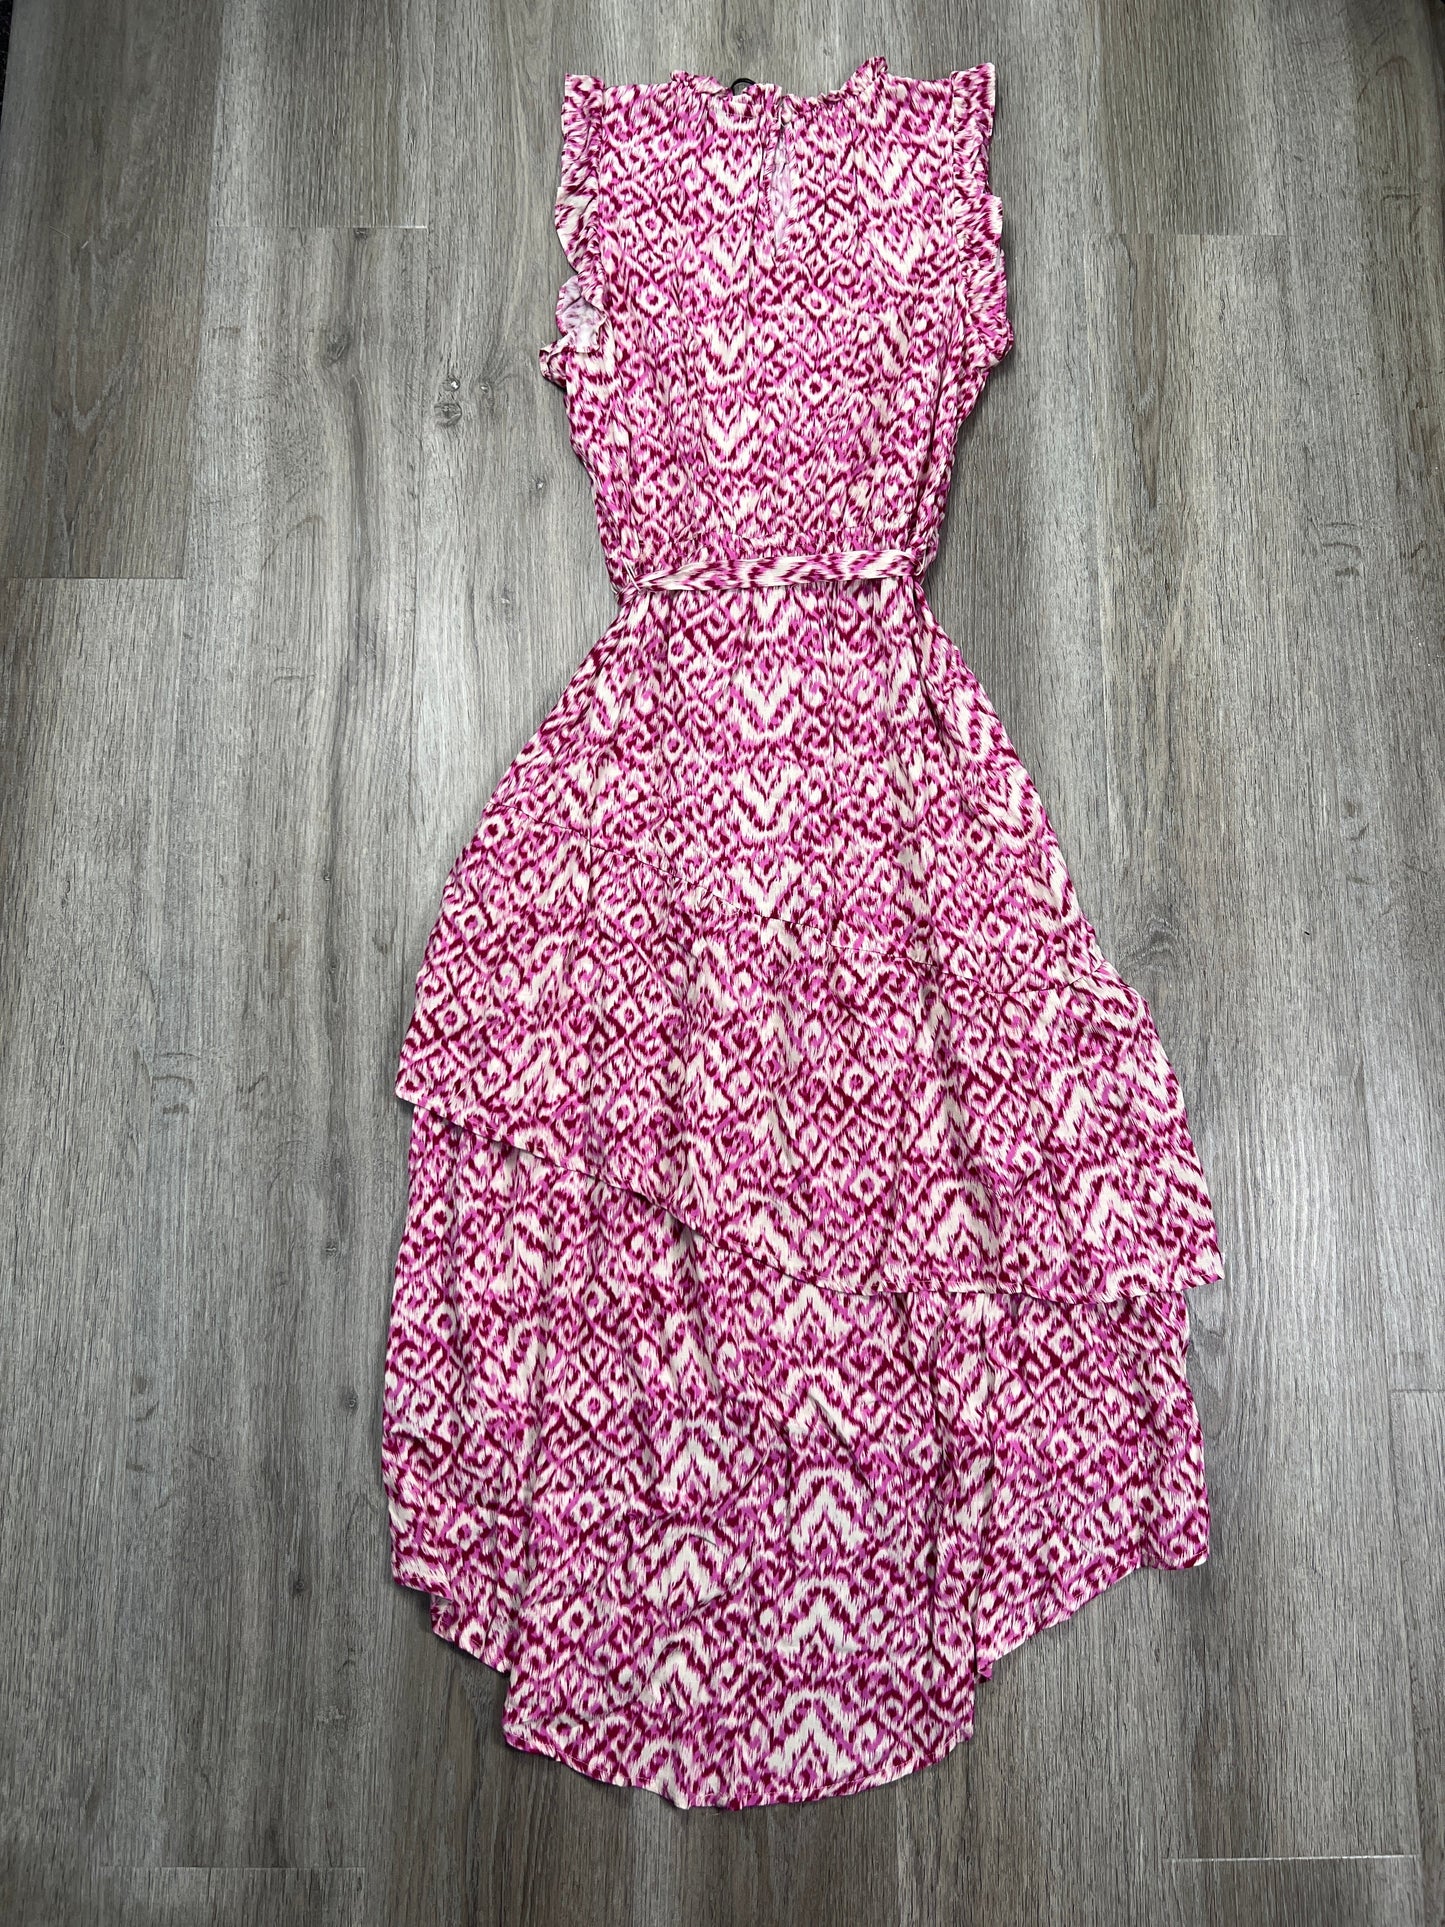 Pink & White Dress Casual Maxi Who What Wear, Size M